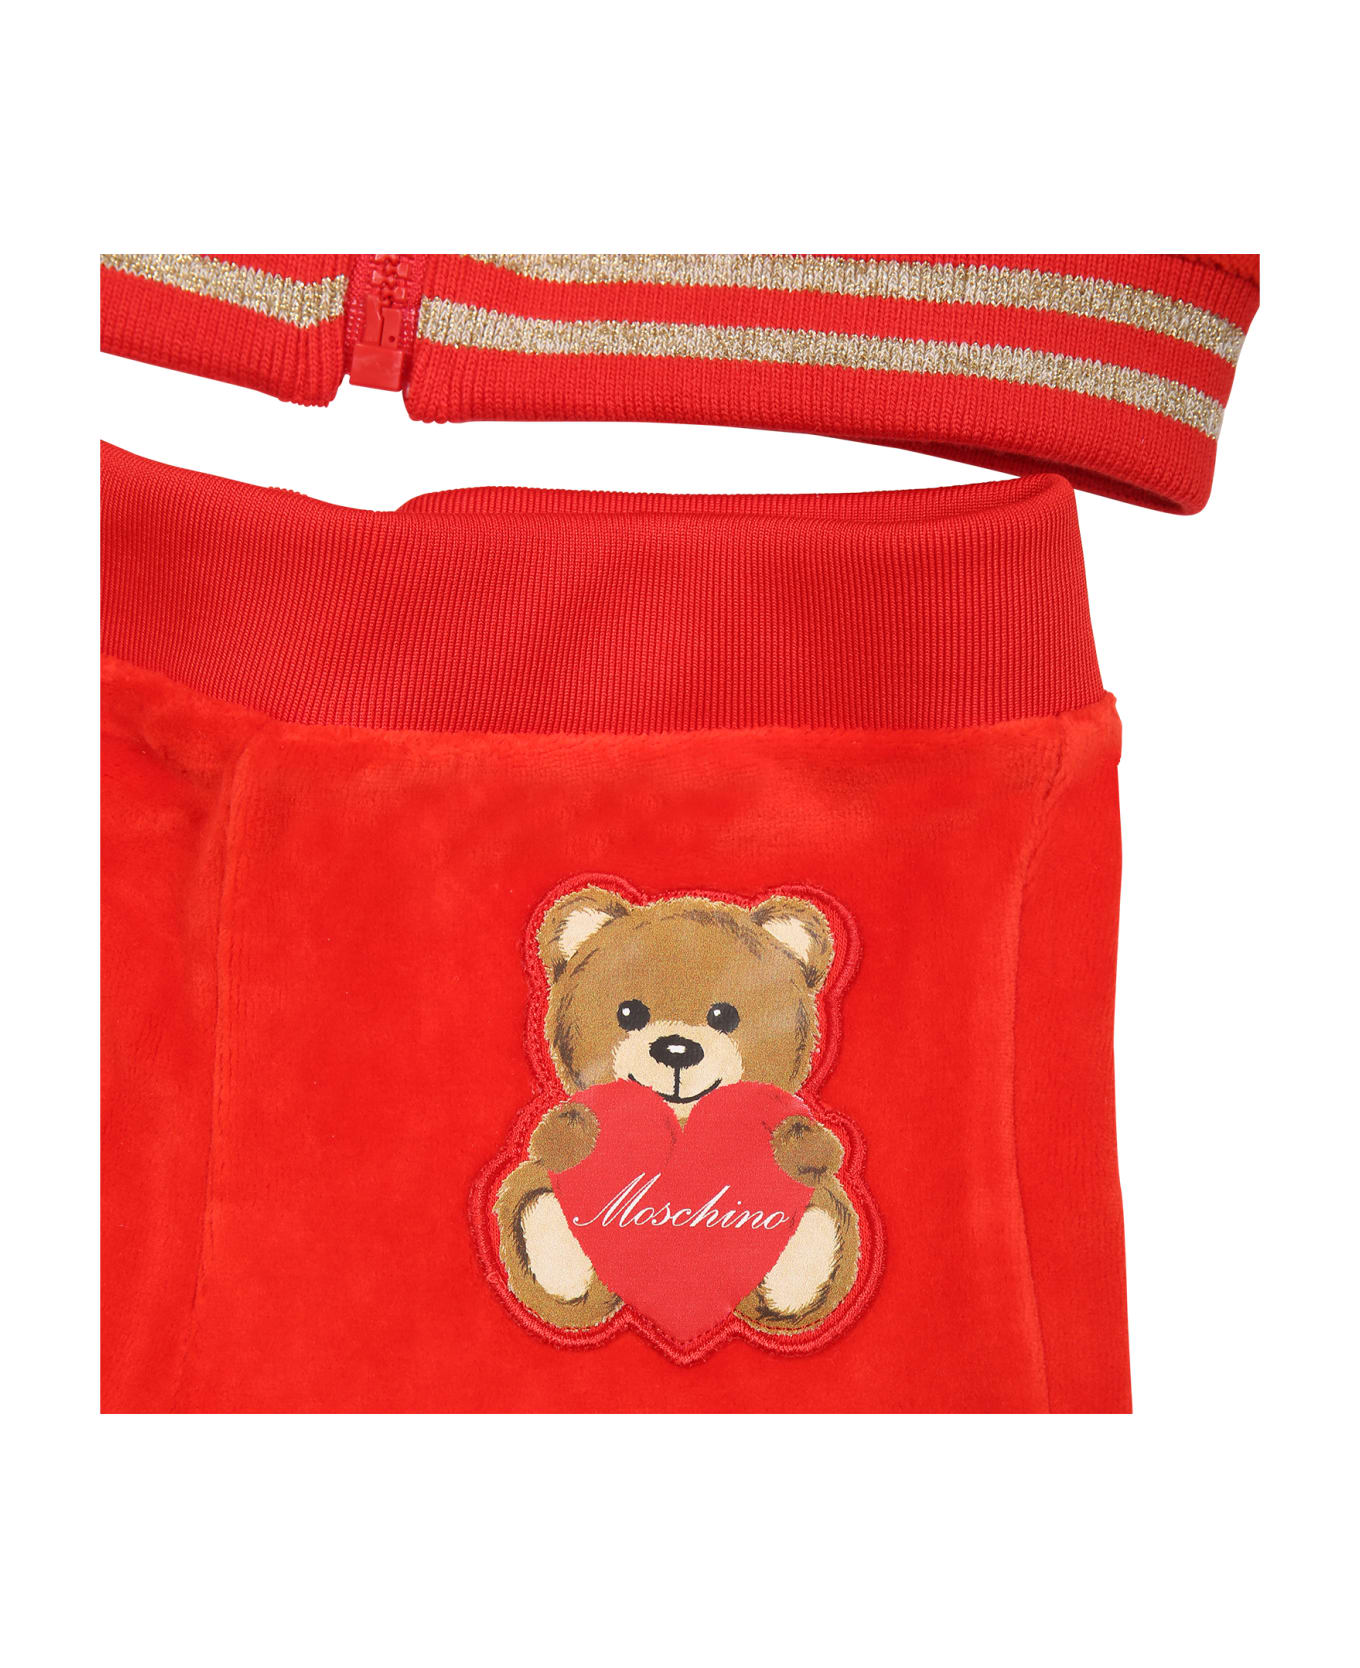 Moschino Red Suit For Baby Girl With Teddy Bear - Red ボトムス